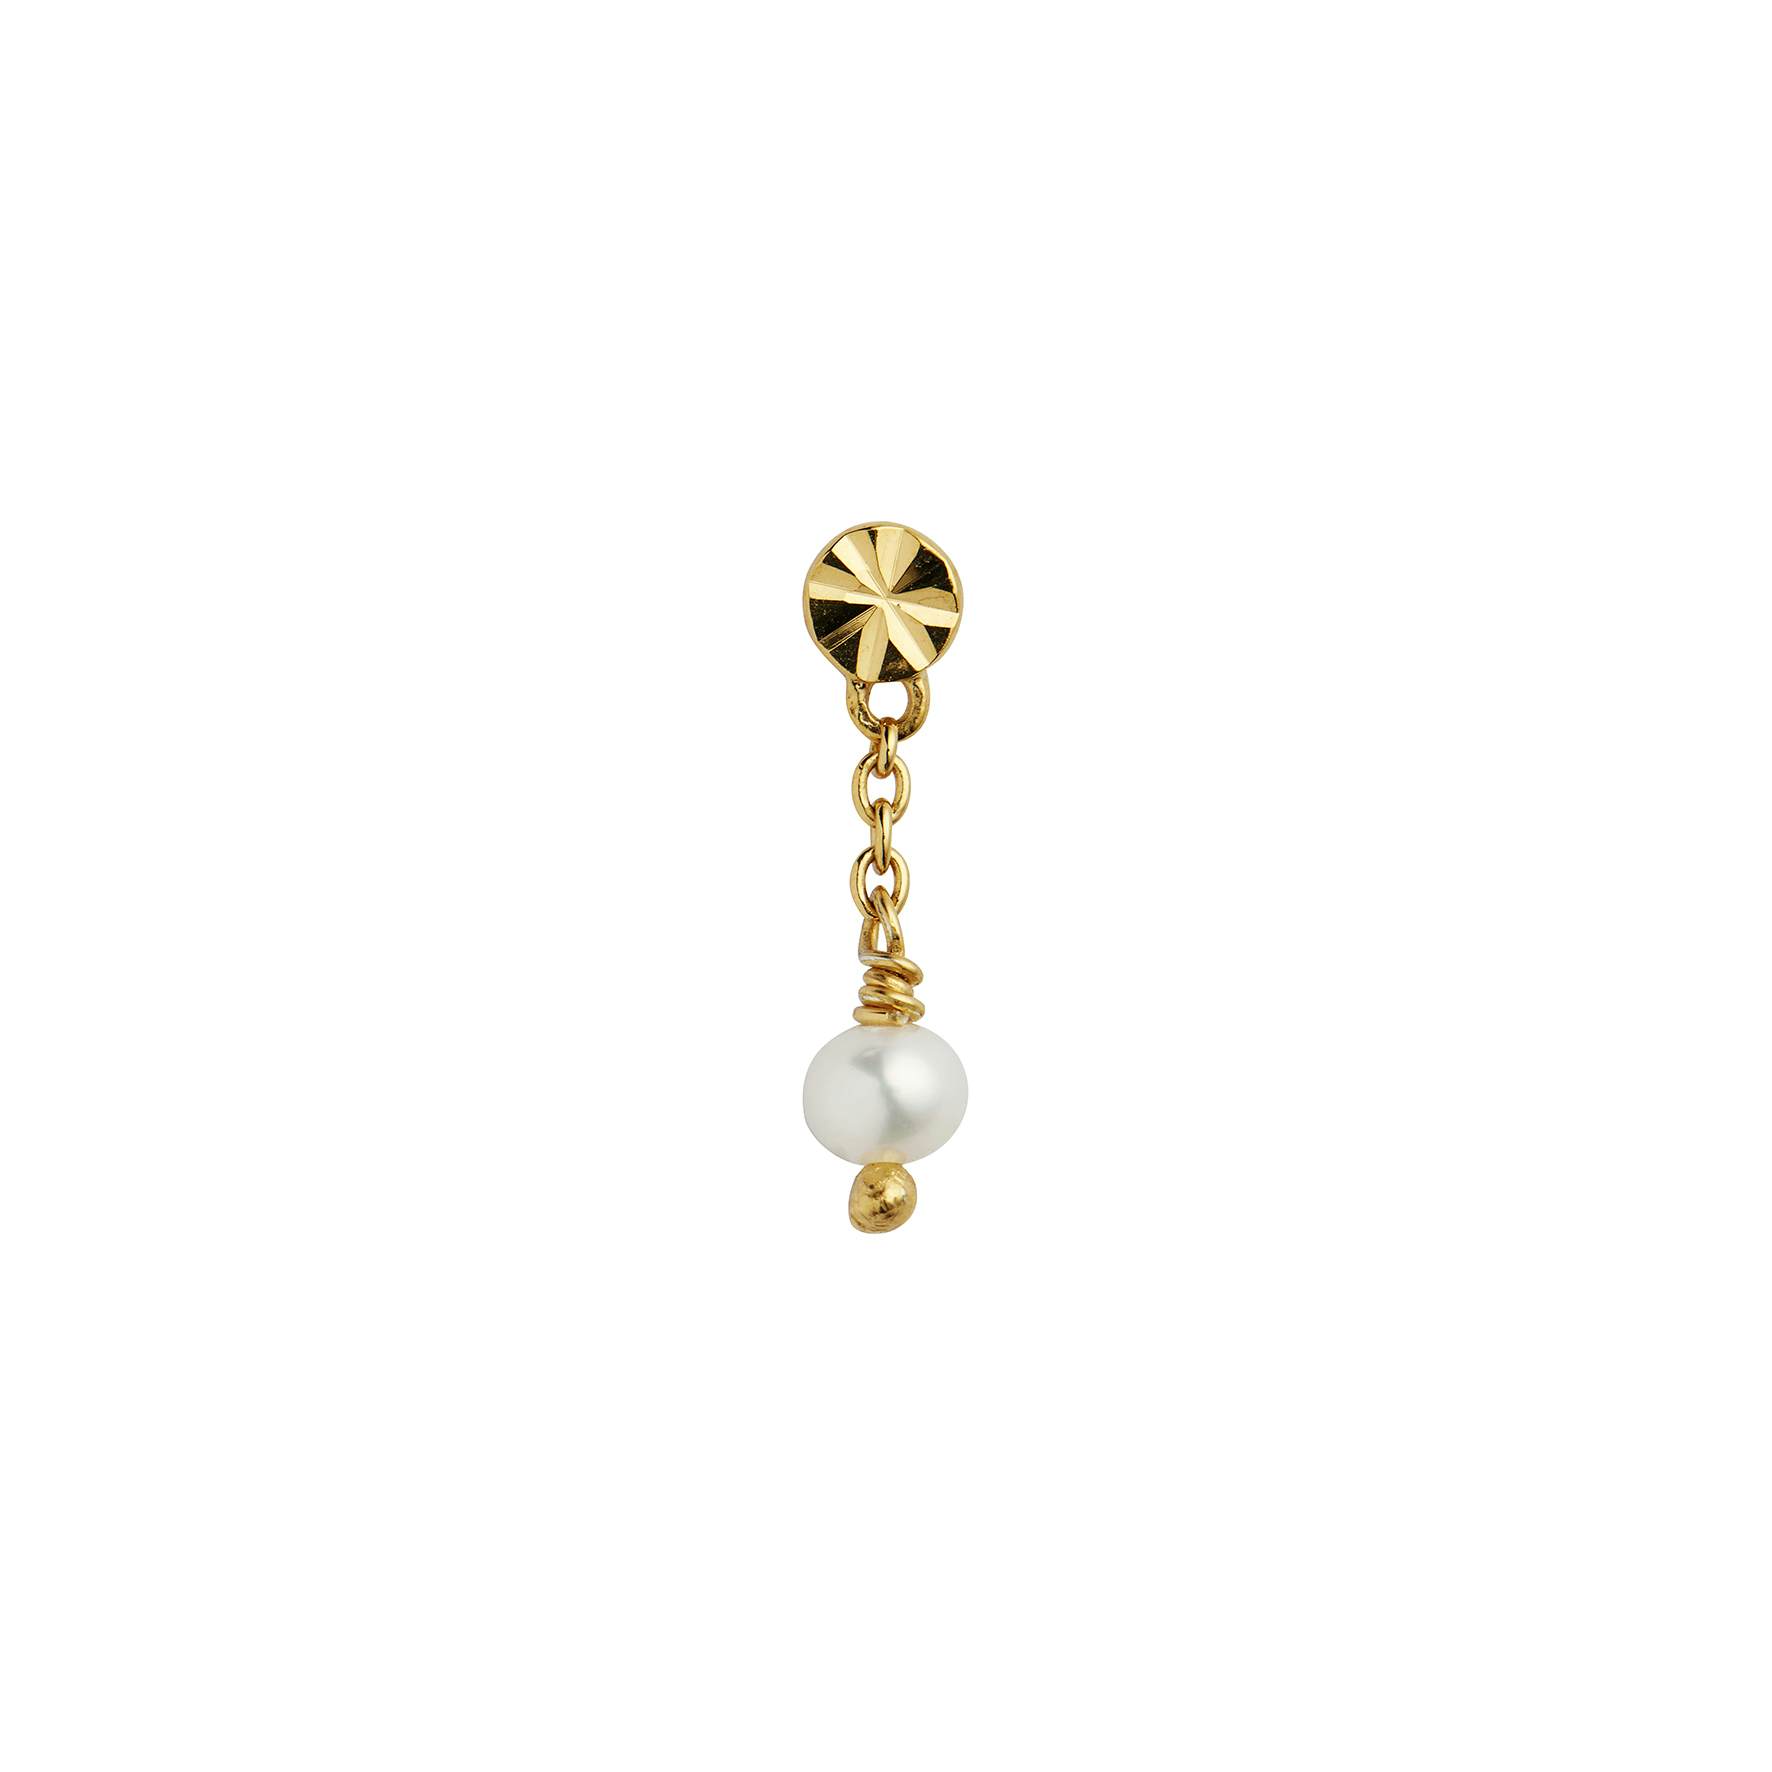 Tres Petit Etoile Earring With Pearl från STINE A Jewelry i Förgyllt-Silver Sterling 925